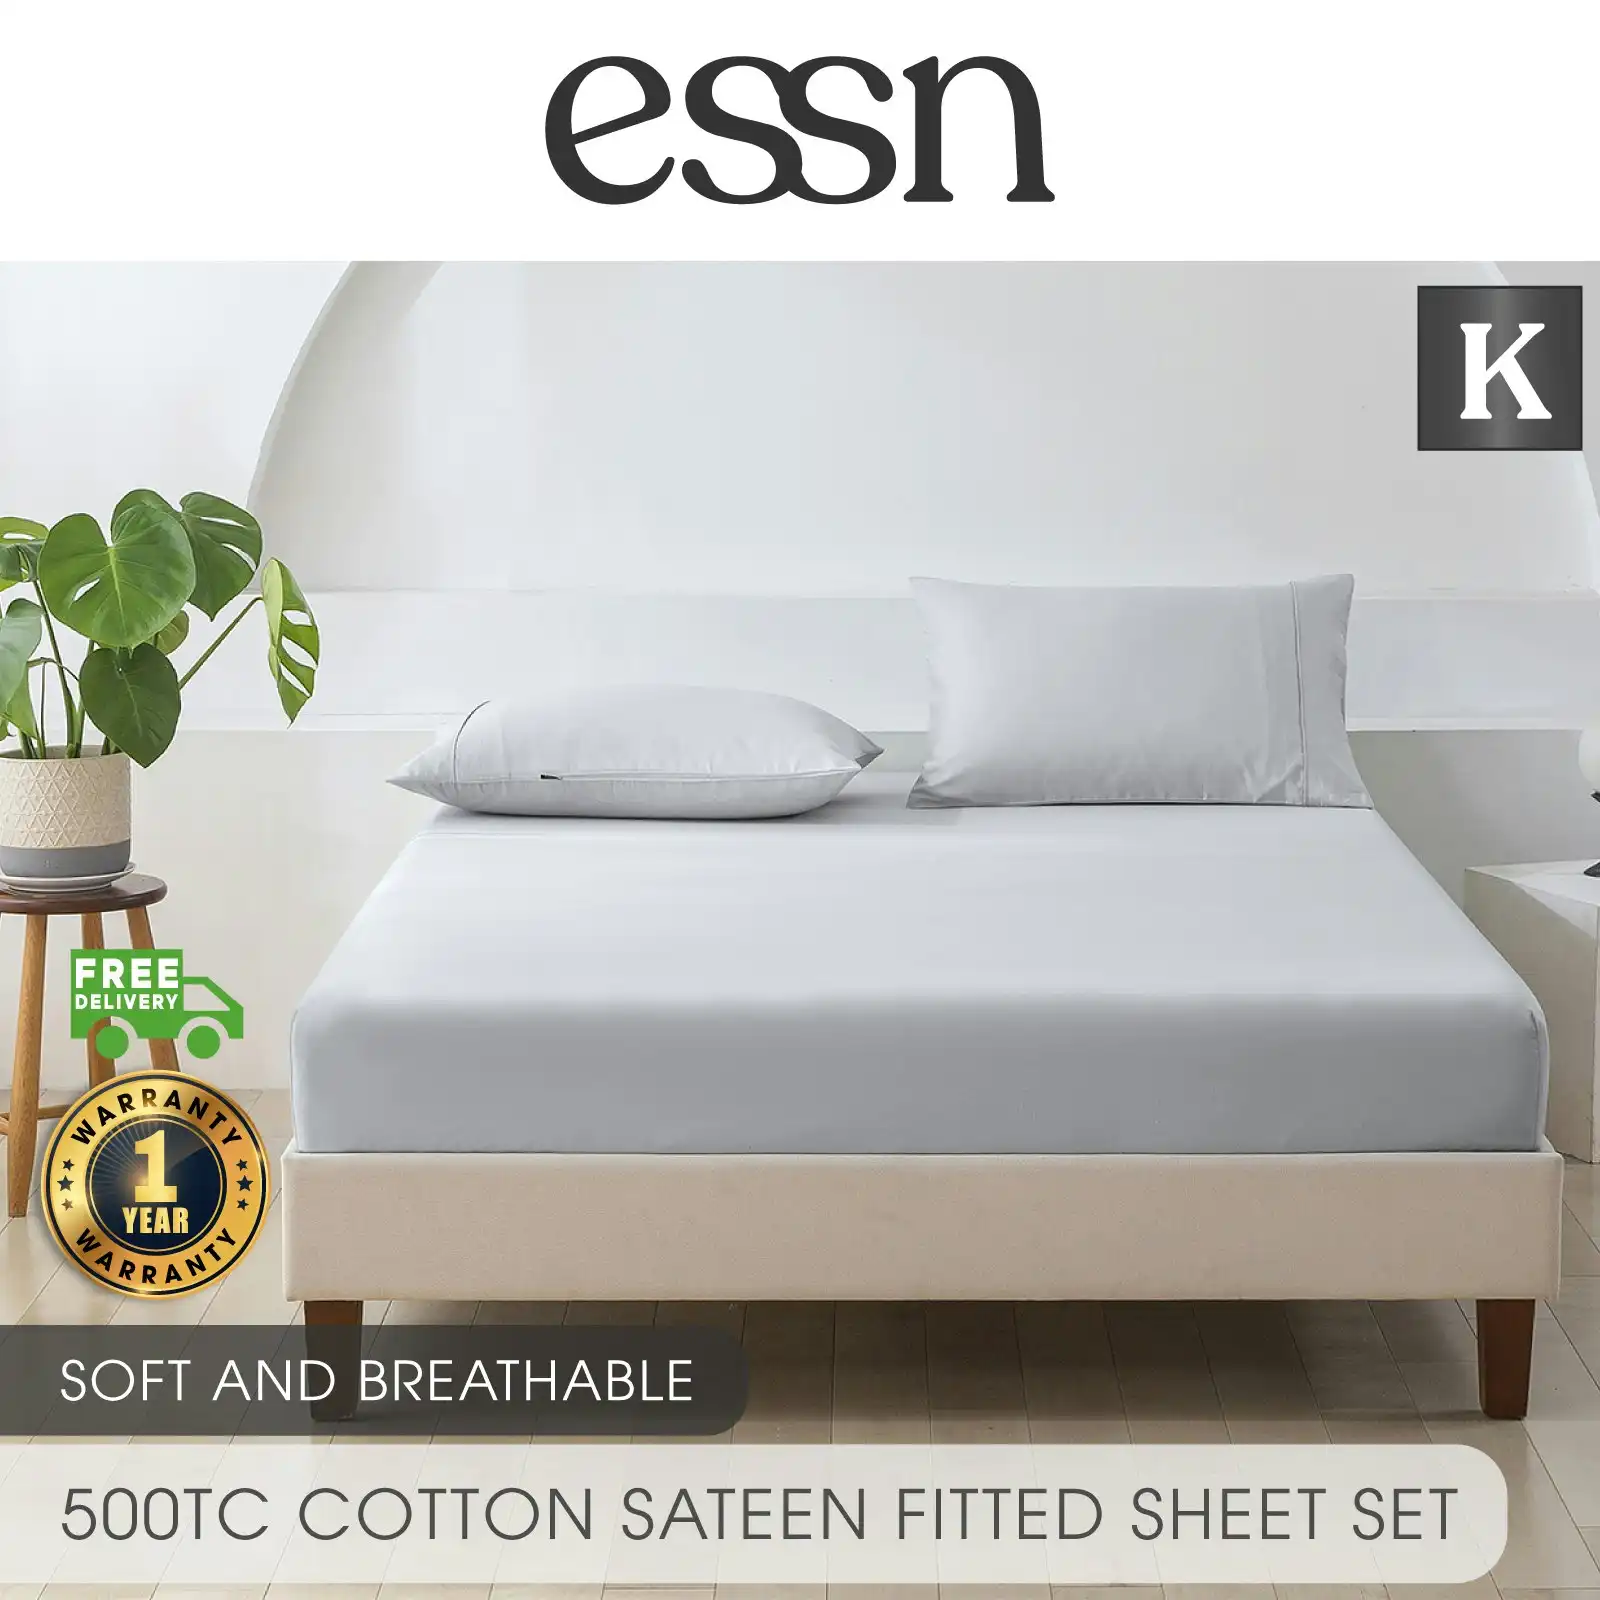 ESSN 500TC Cotton Sateen Fitted Sheet Set Silver King Bed